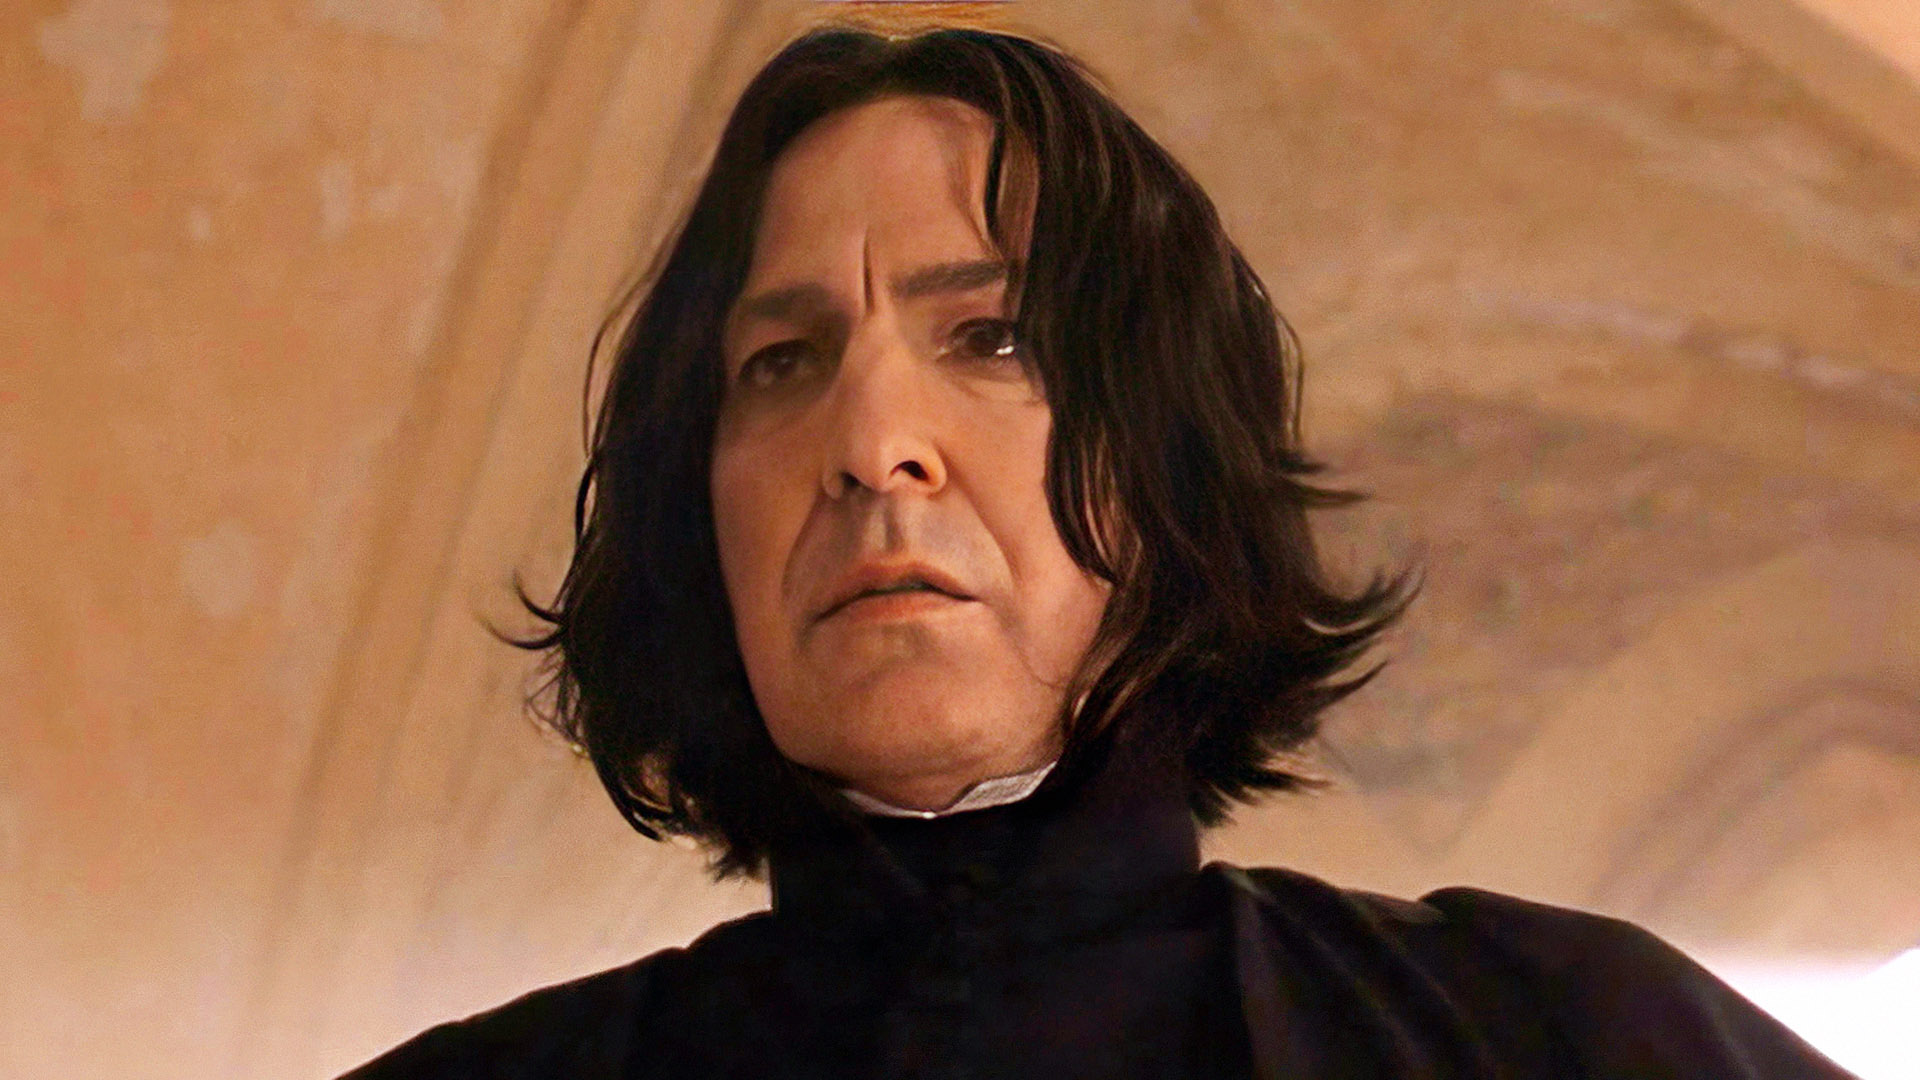 We Finally Have a Perfect Explanation How Snape Played Voldemort For Years